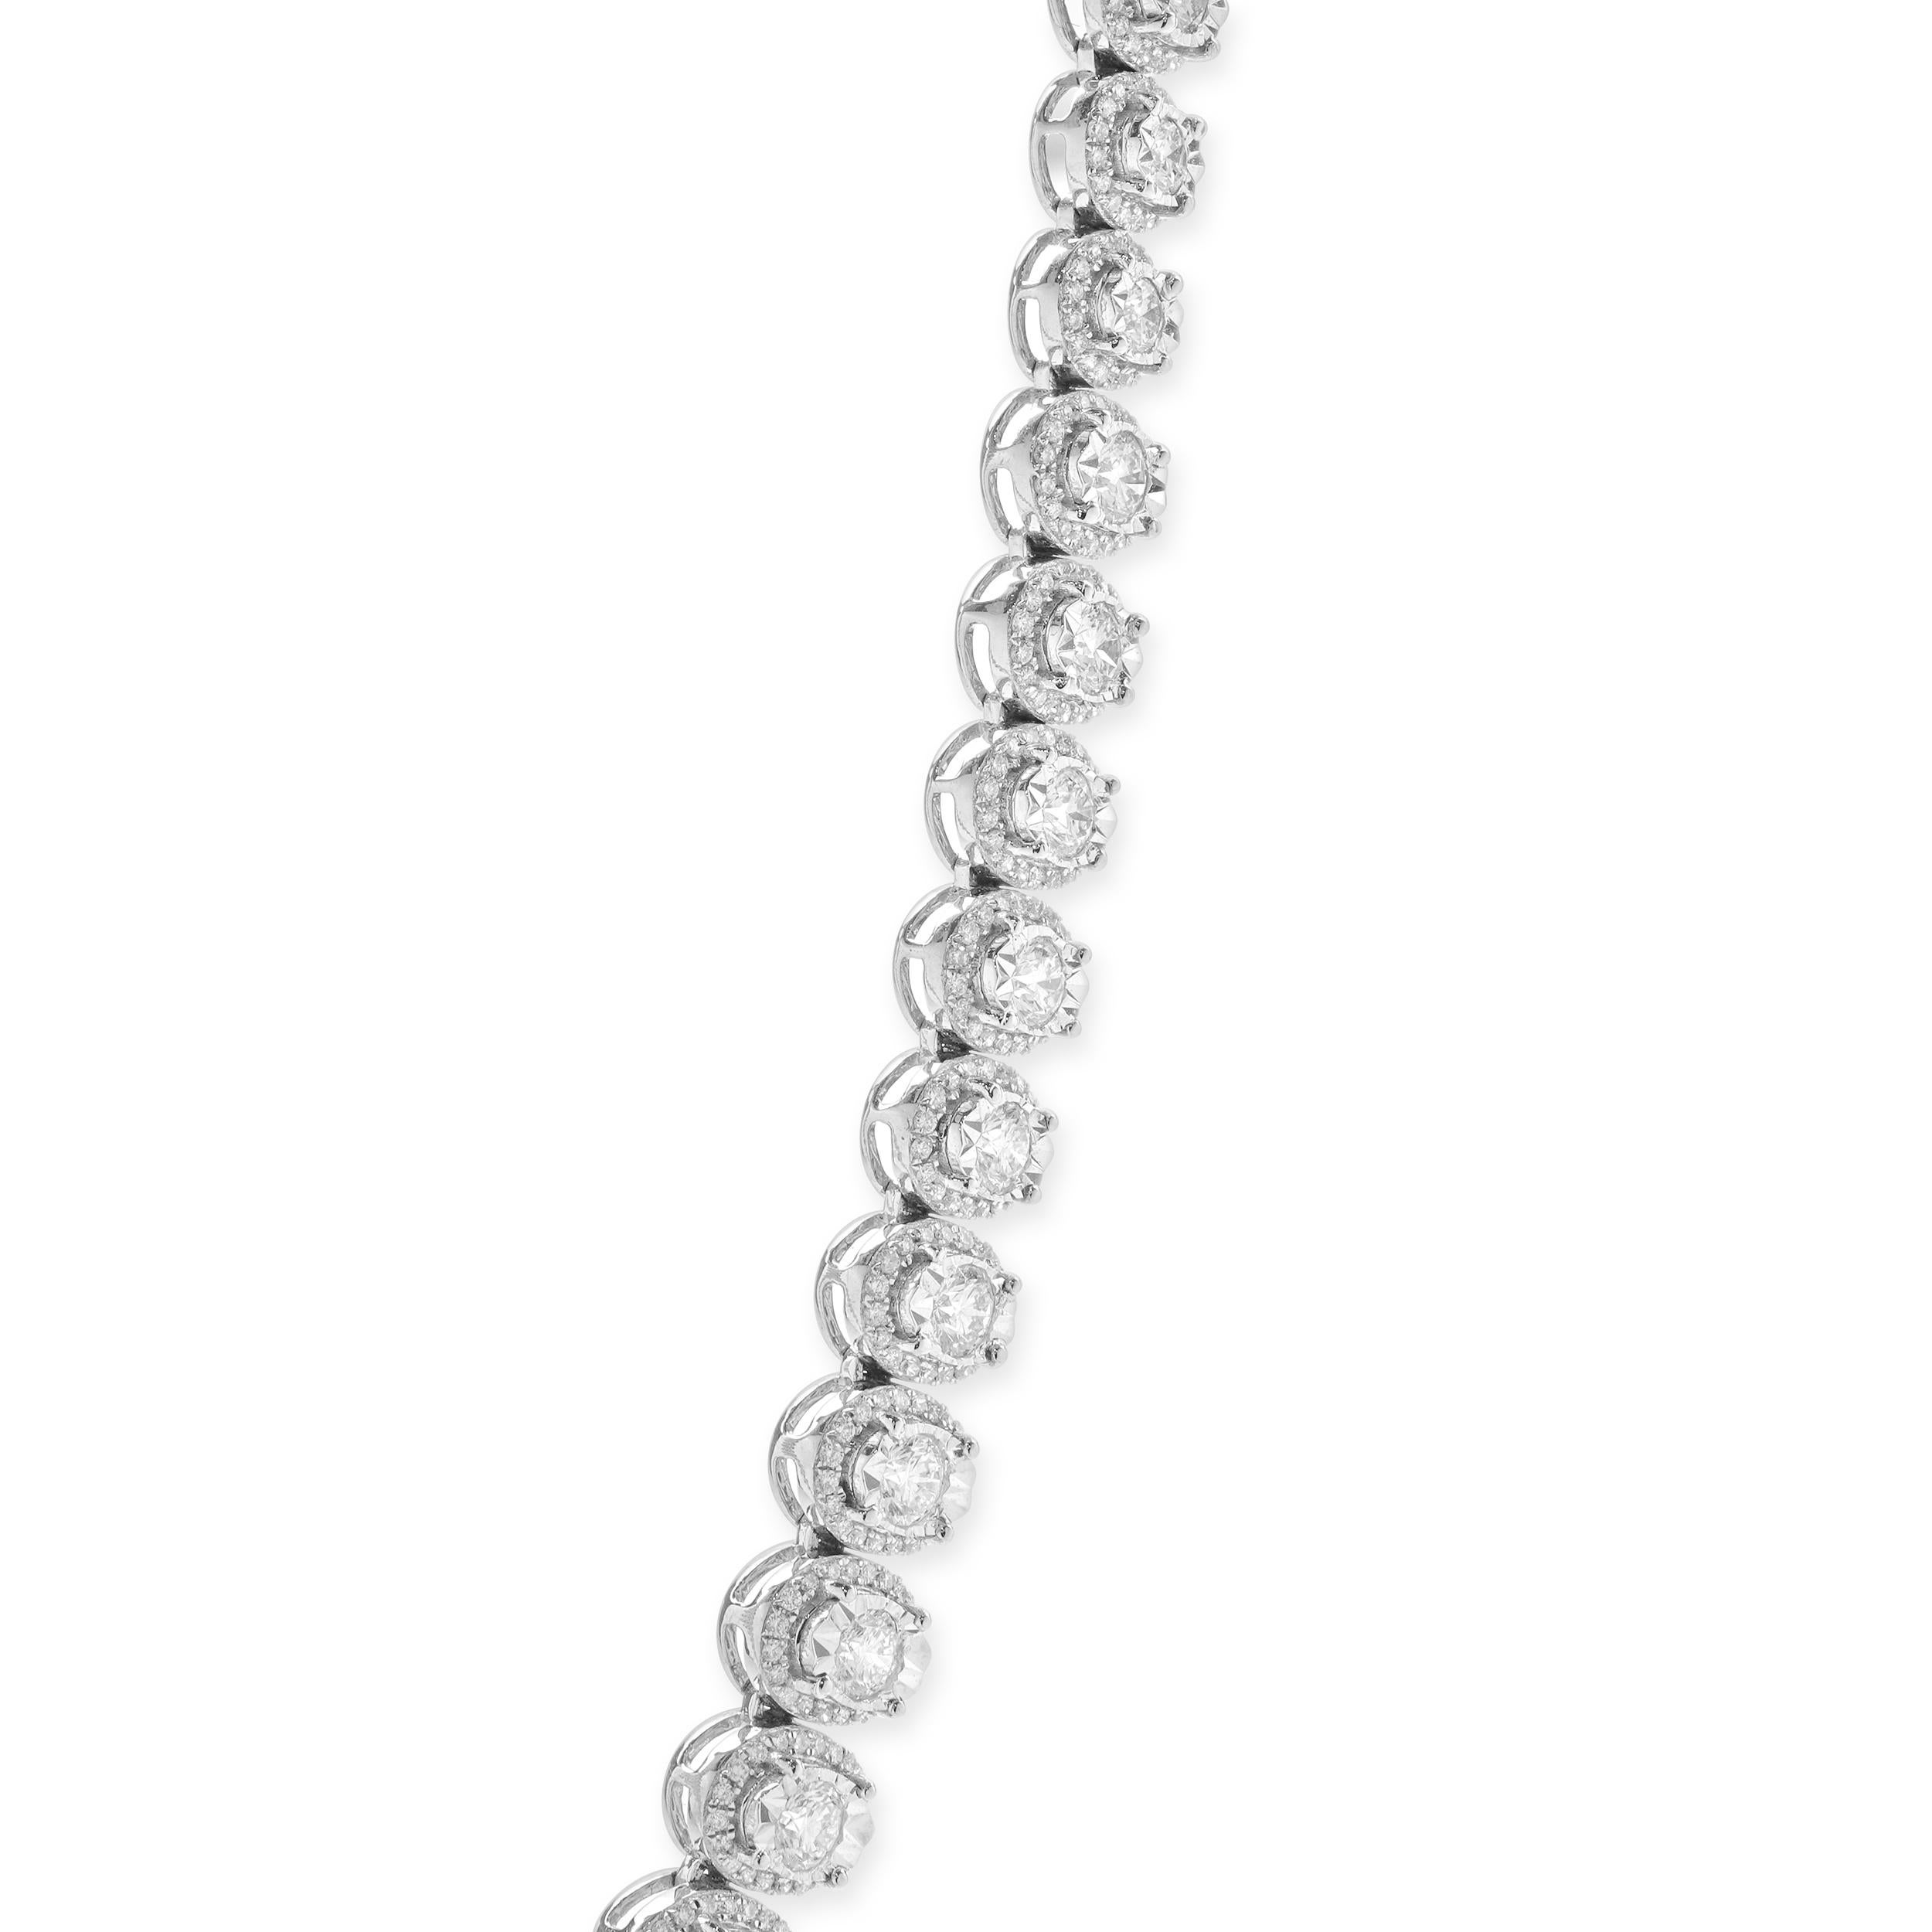 Designer: custom
Material: 14K white gold
Diamonds:  round brilliant Diamonds= 8.30cttw
Color: G-H
Clarity:VS-SI1
Dimensions: necklace measures 16.5-inches in length 
Weight: 36.93 grams
